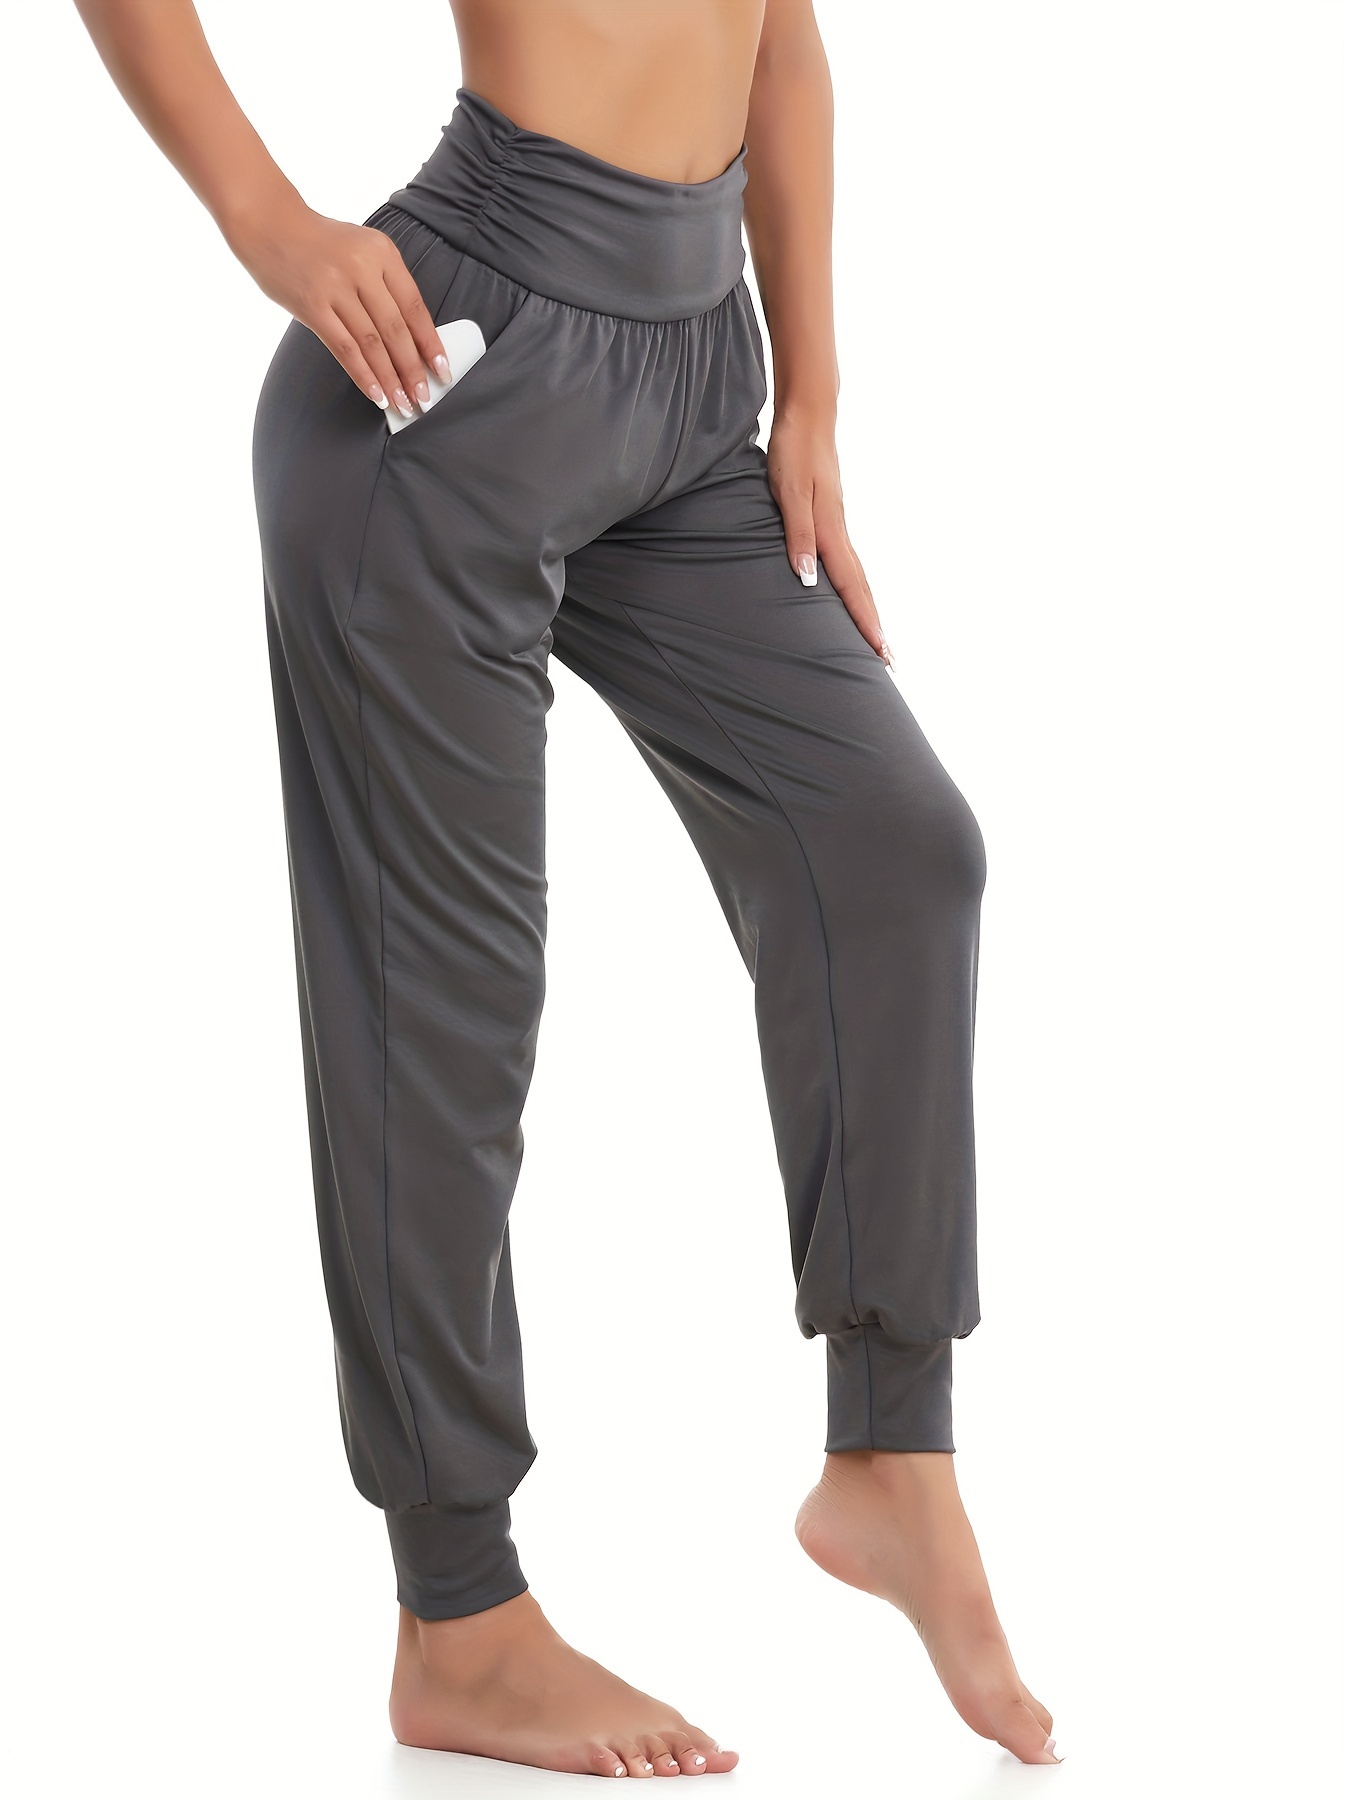  Pockets Plus Size Joggers for Women Yoga Pants Casual